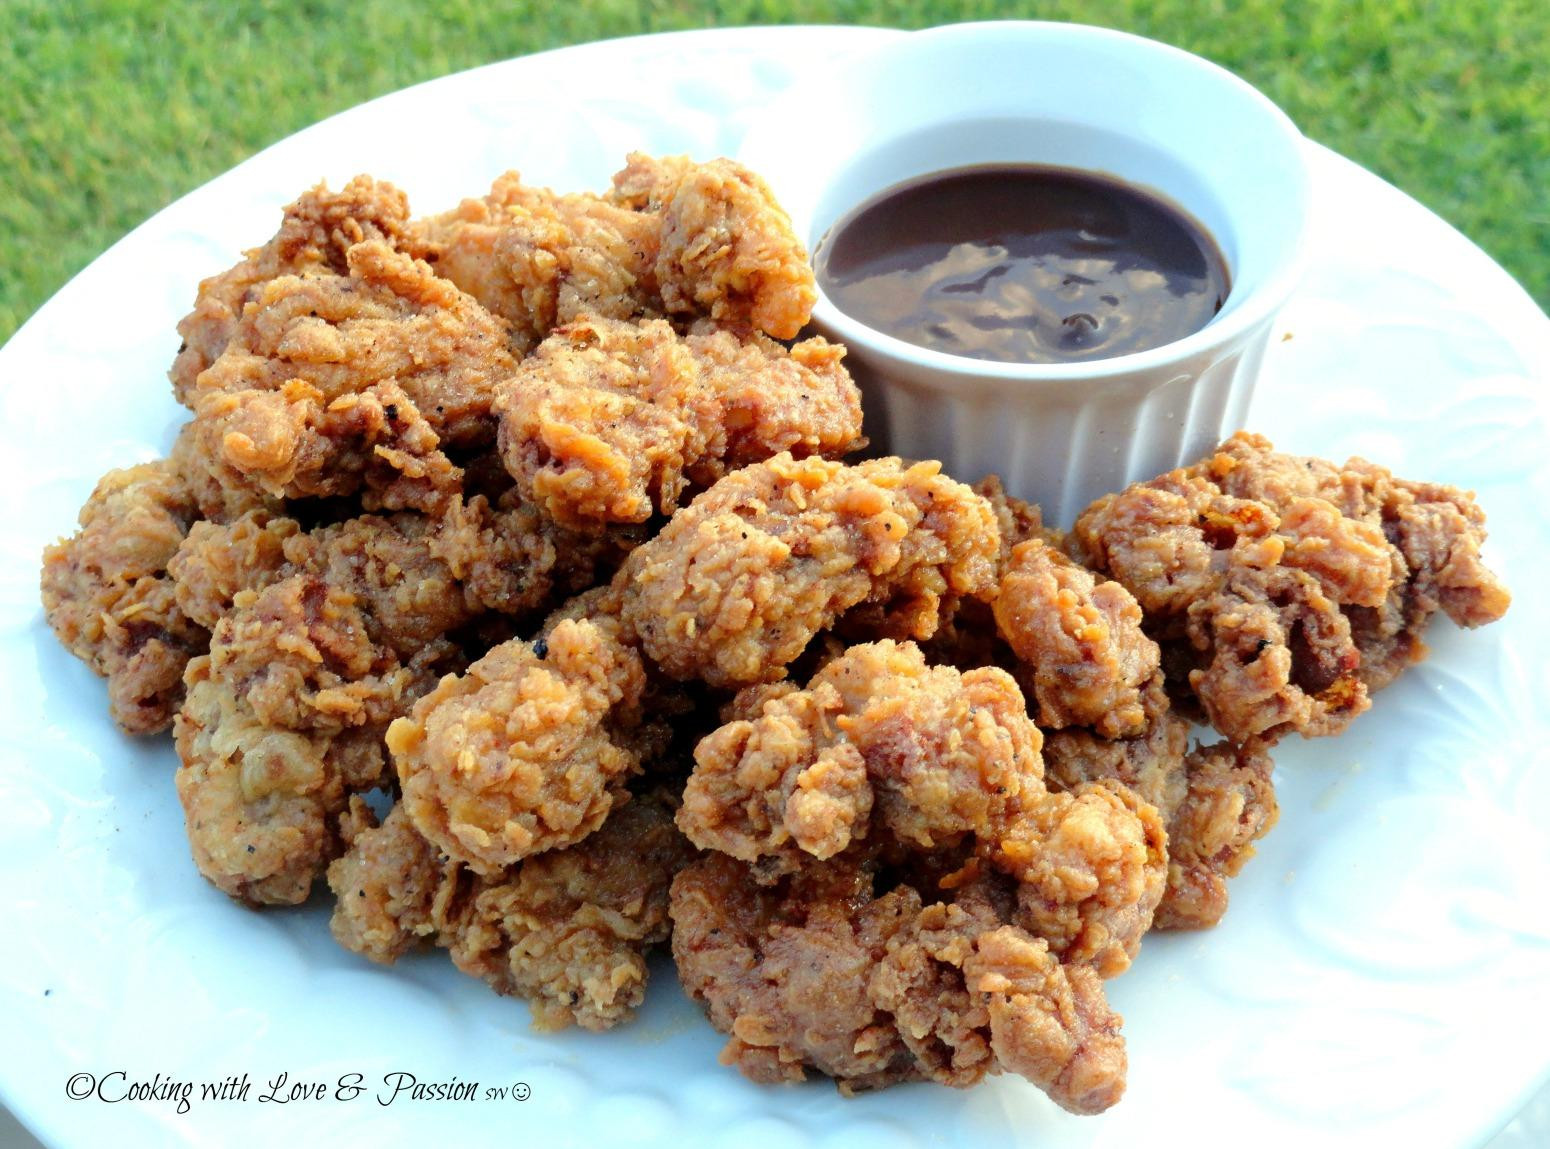 Recipes For Deep Fried Chicken
 My Mississippi Boy s Deep Fried Chicken Gizzards Recipe